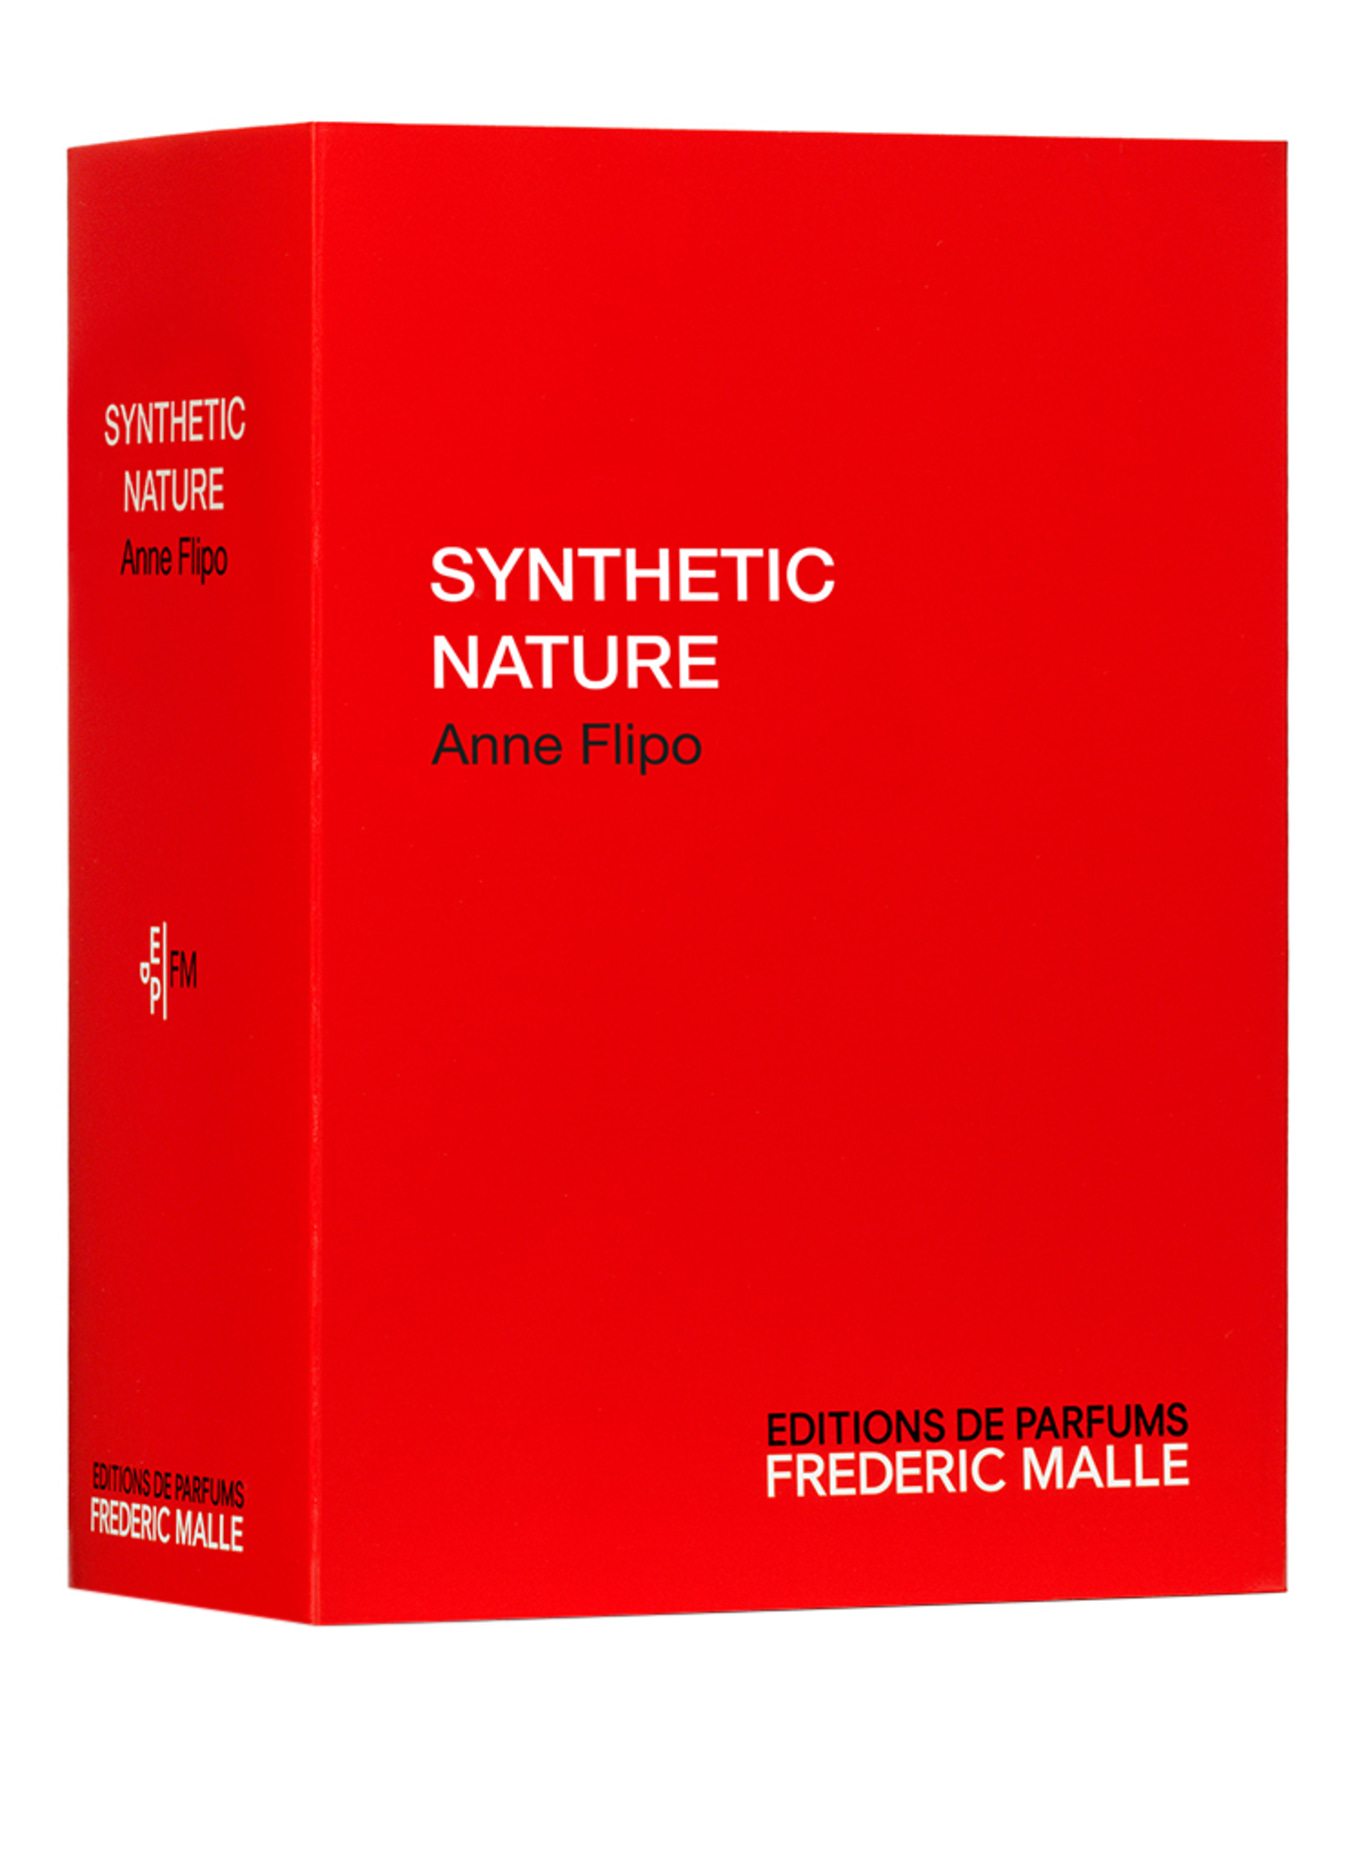 EDITIONS DE PARFUMS FREDERIC MALLE SYNTHETIC NATURE COLOGNE (Obrázek 2)